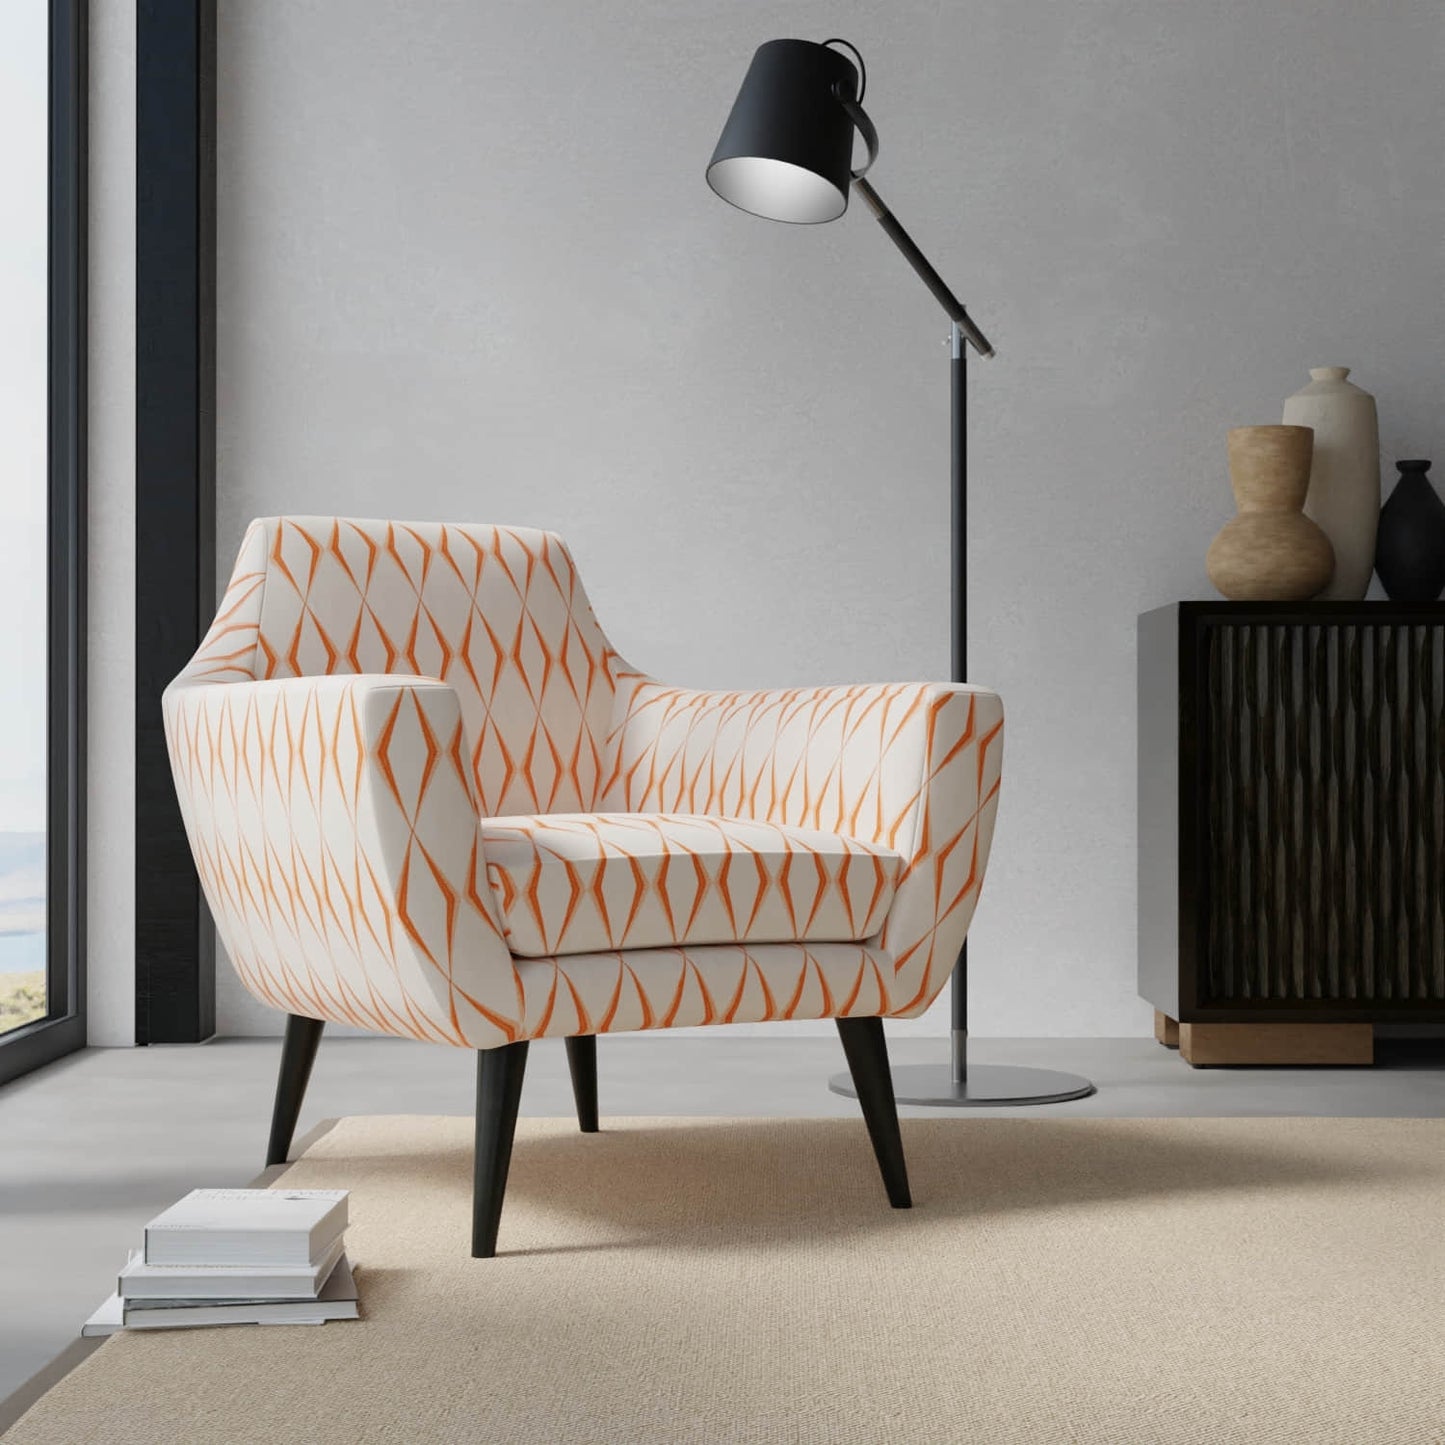 Becker Tangerine upholstered on a contemporary chair